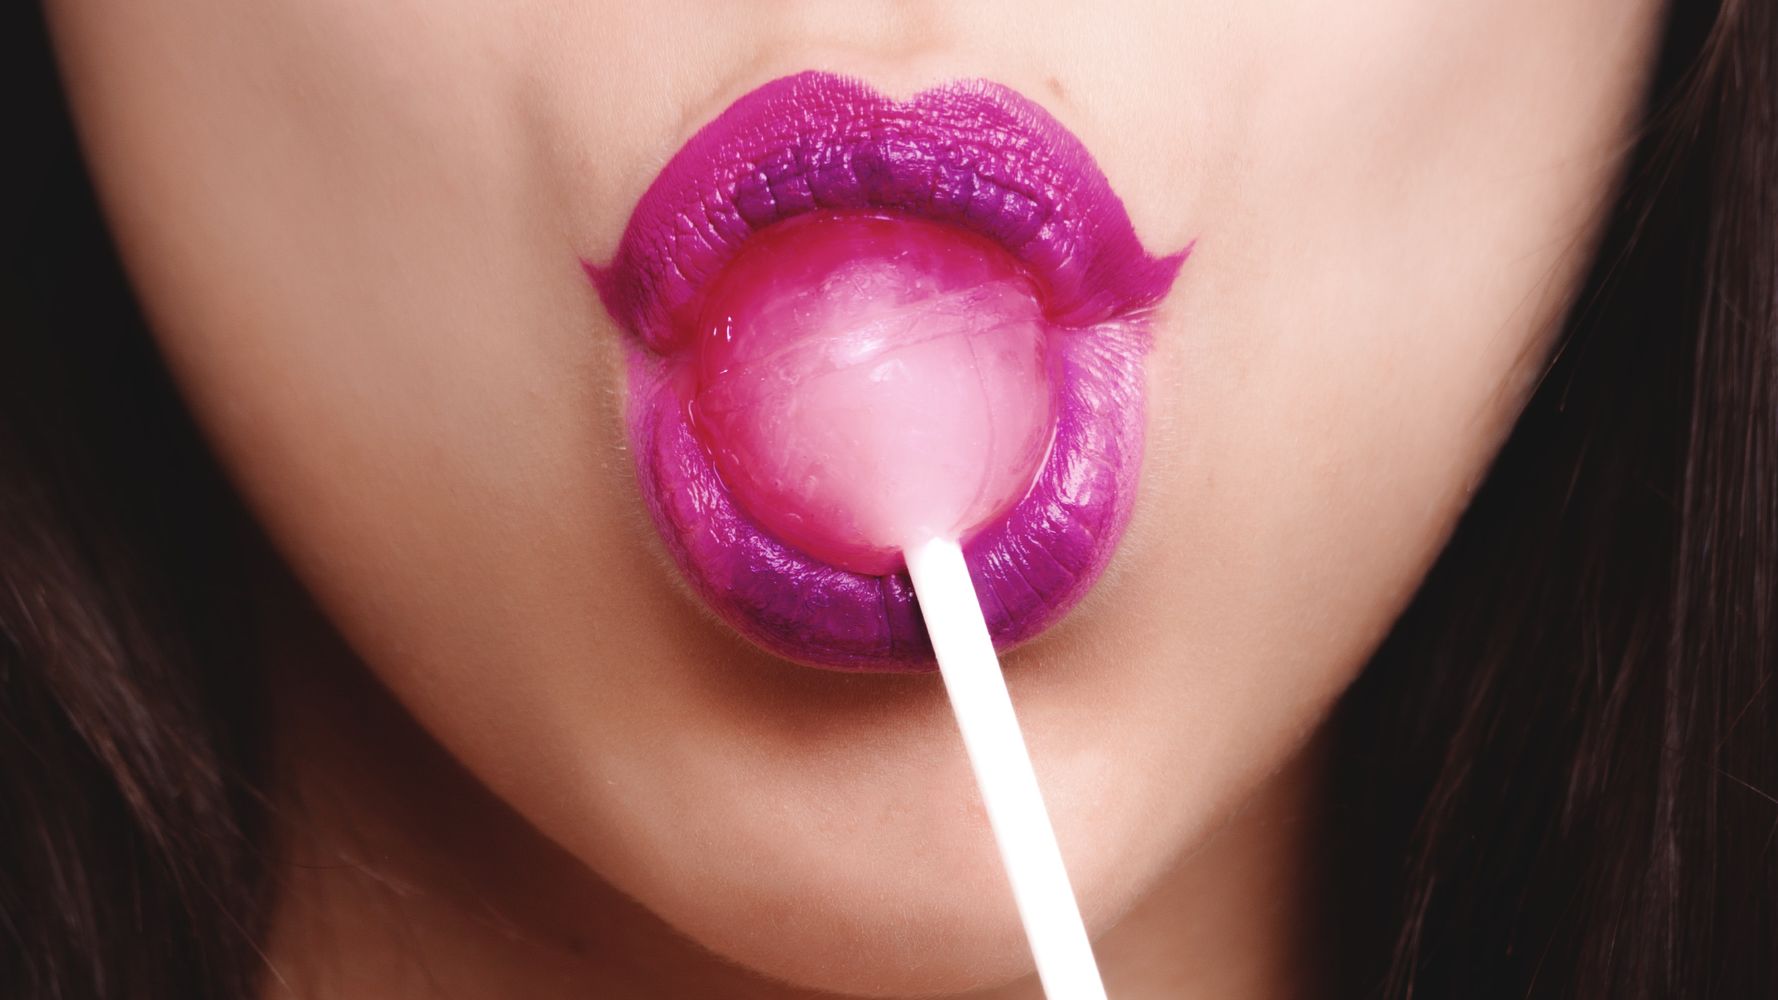 Lady With Pink Lips Sucking Pink Lolipop